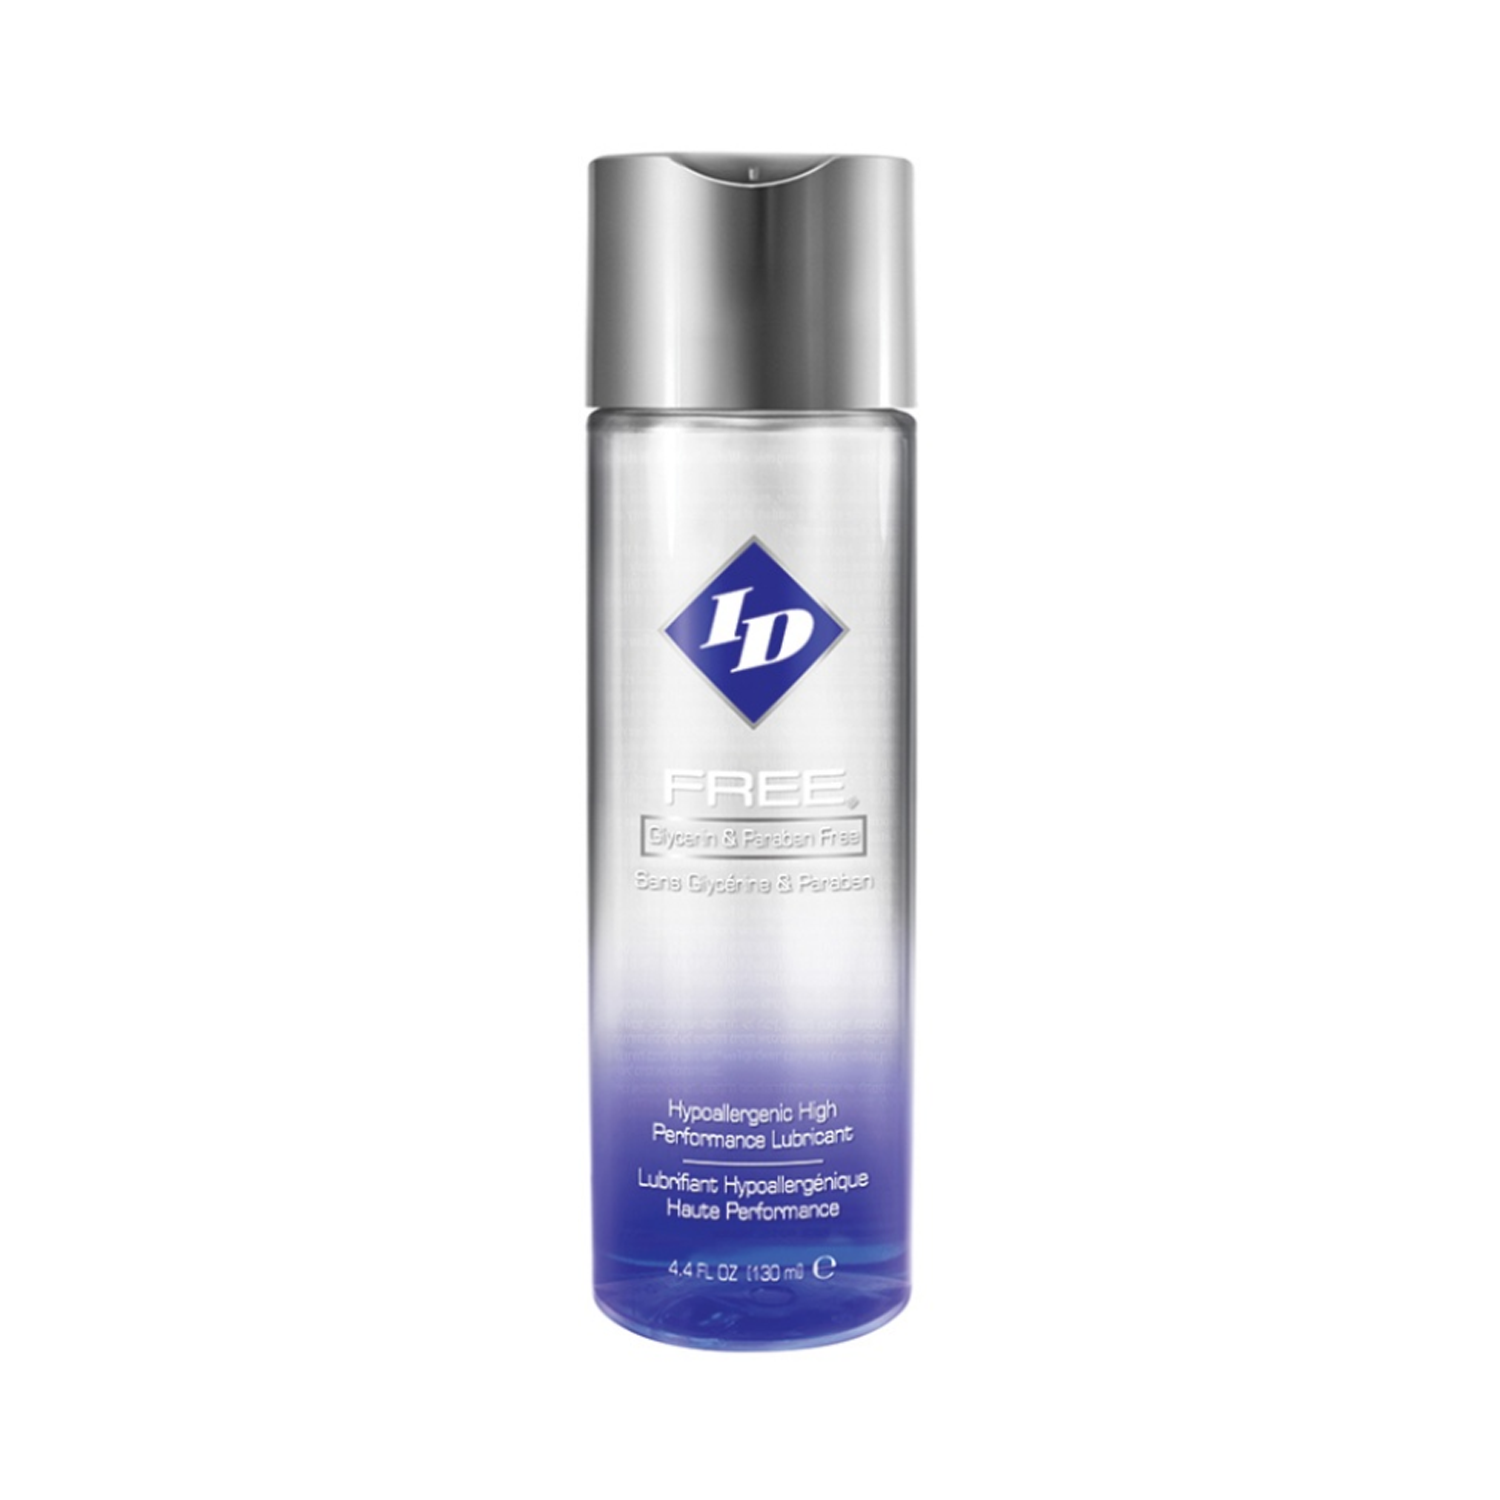 ID Lube - FREE Water-based Lubricant Bottle - Storming Gravity